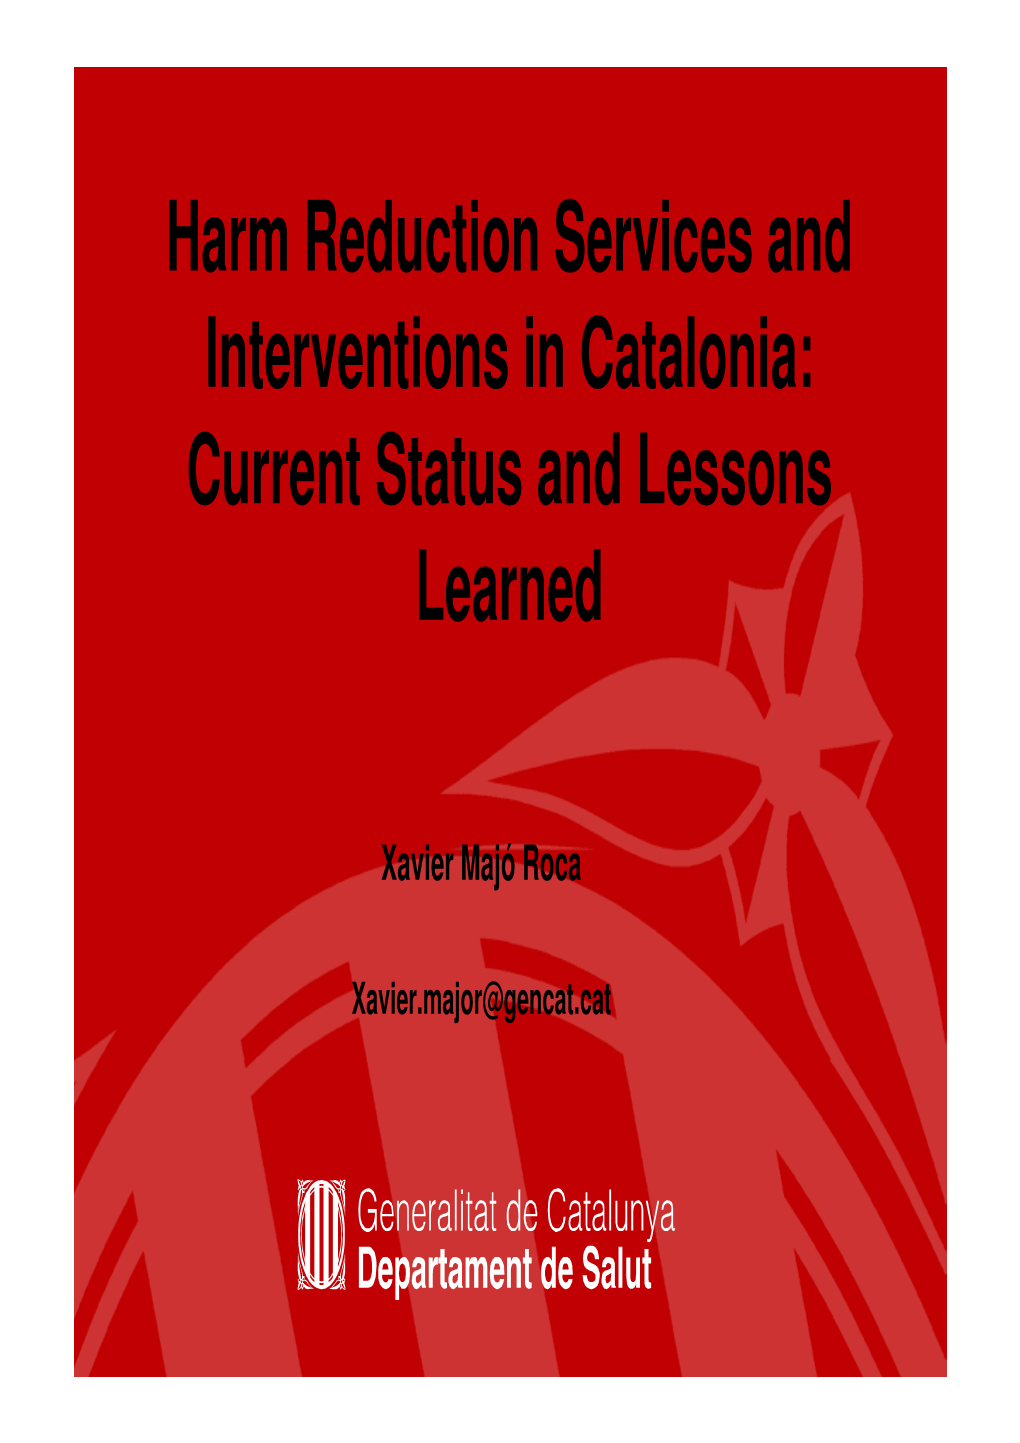 Harm Reduction Services and Interventions in Catalonia: Current Status and Lessons Learned